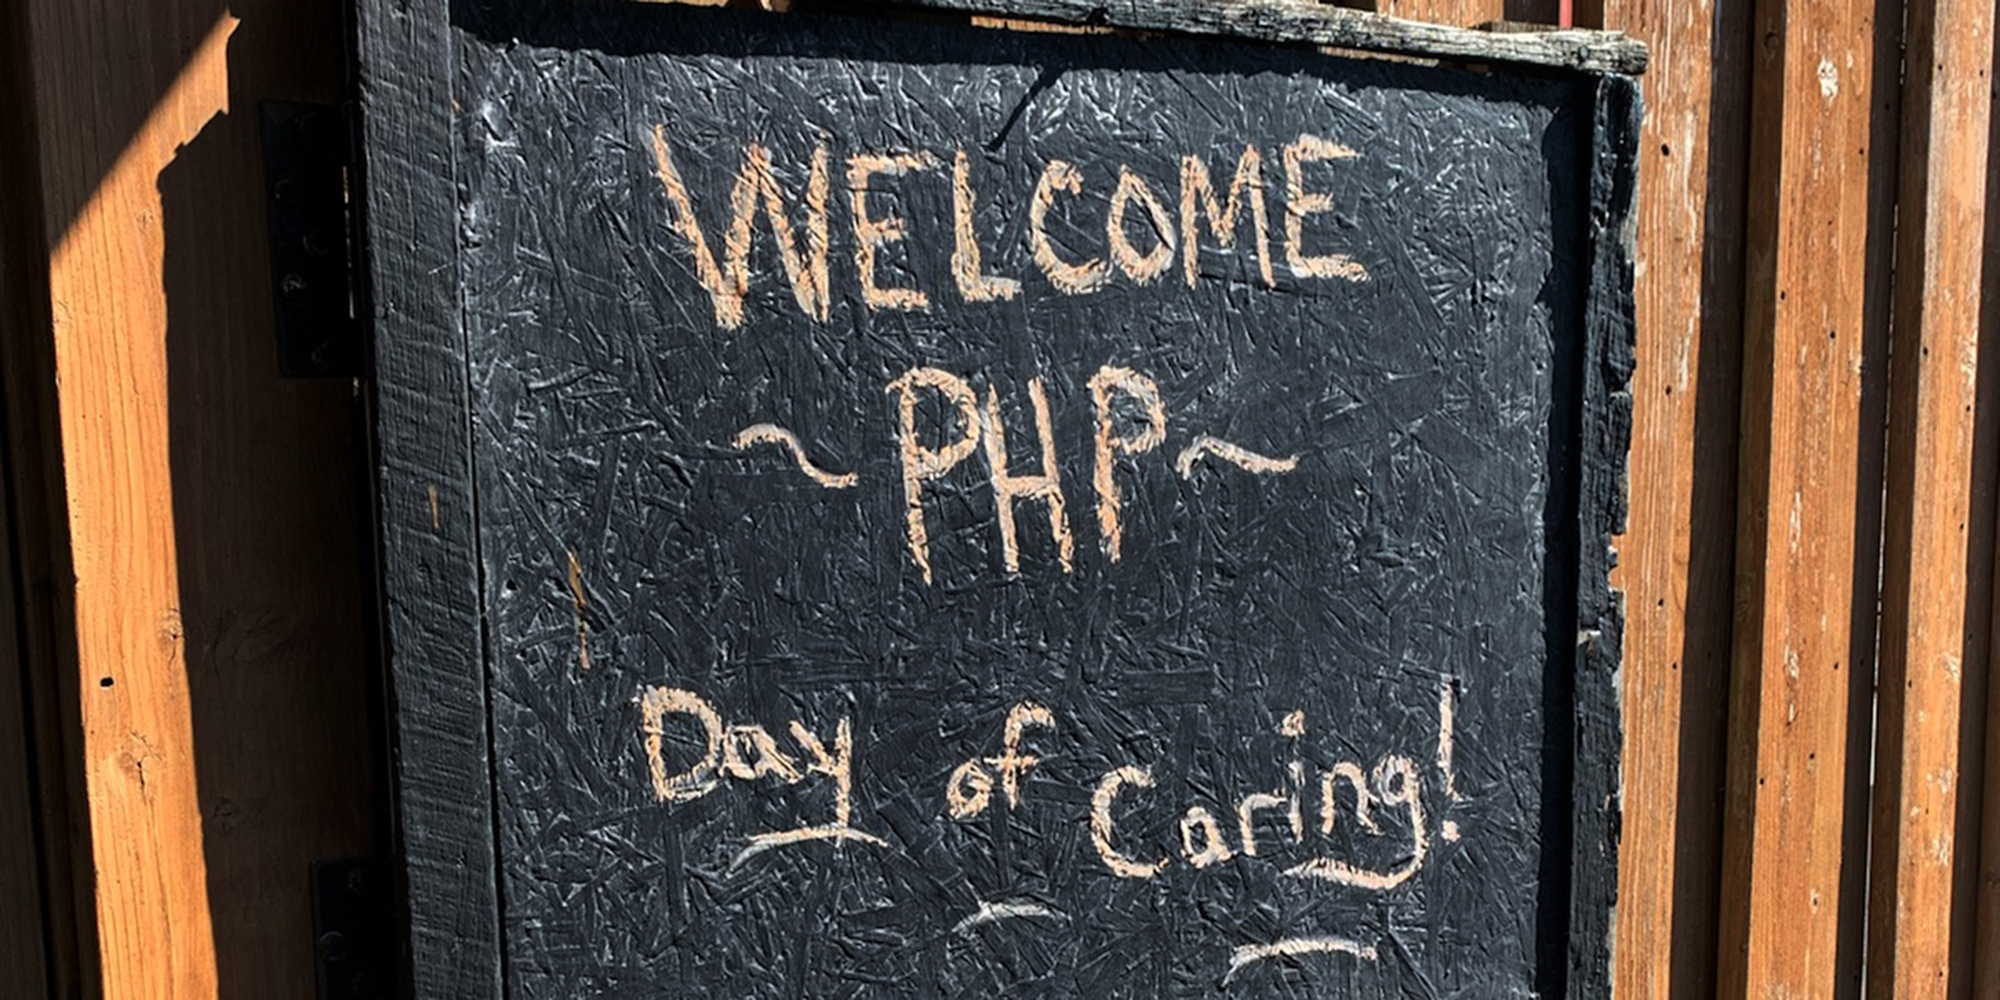 PHP Day of Caring Blog